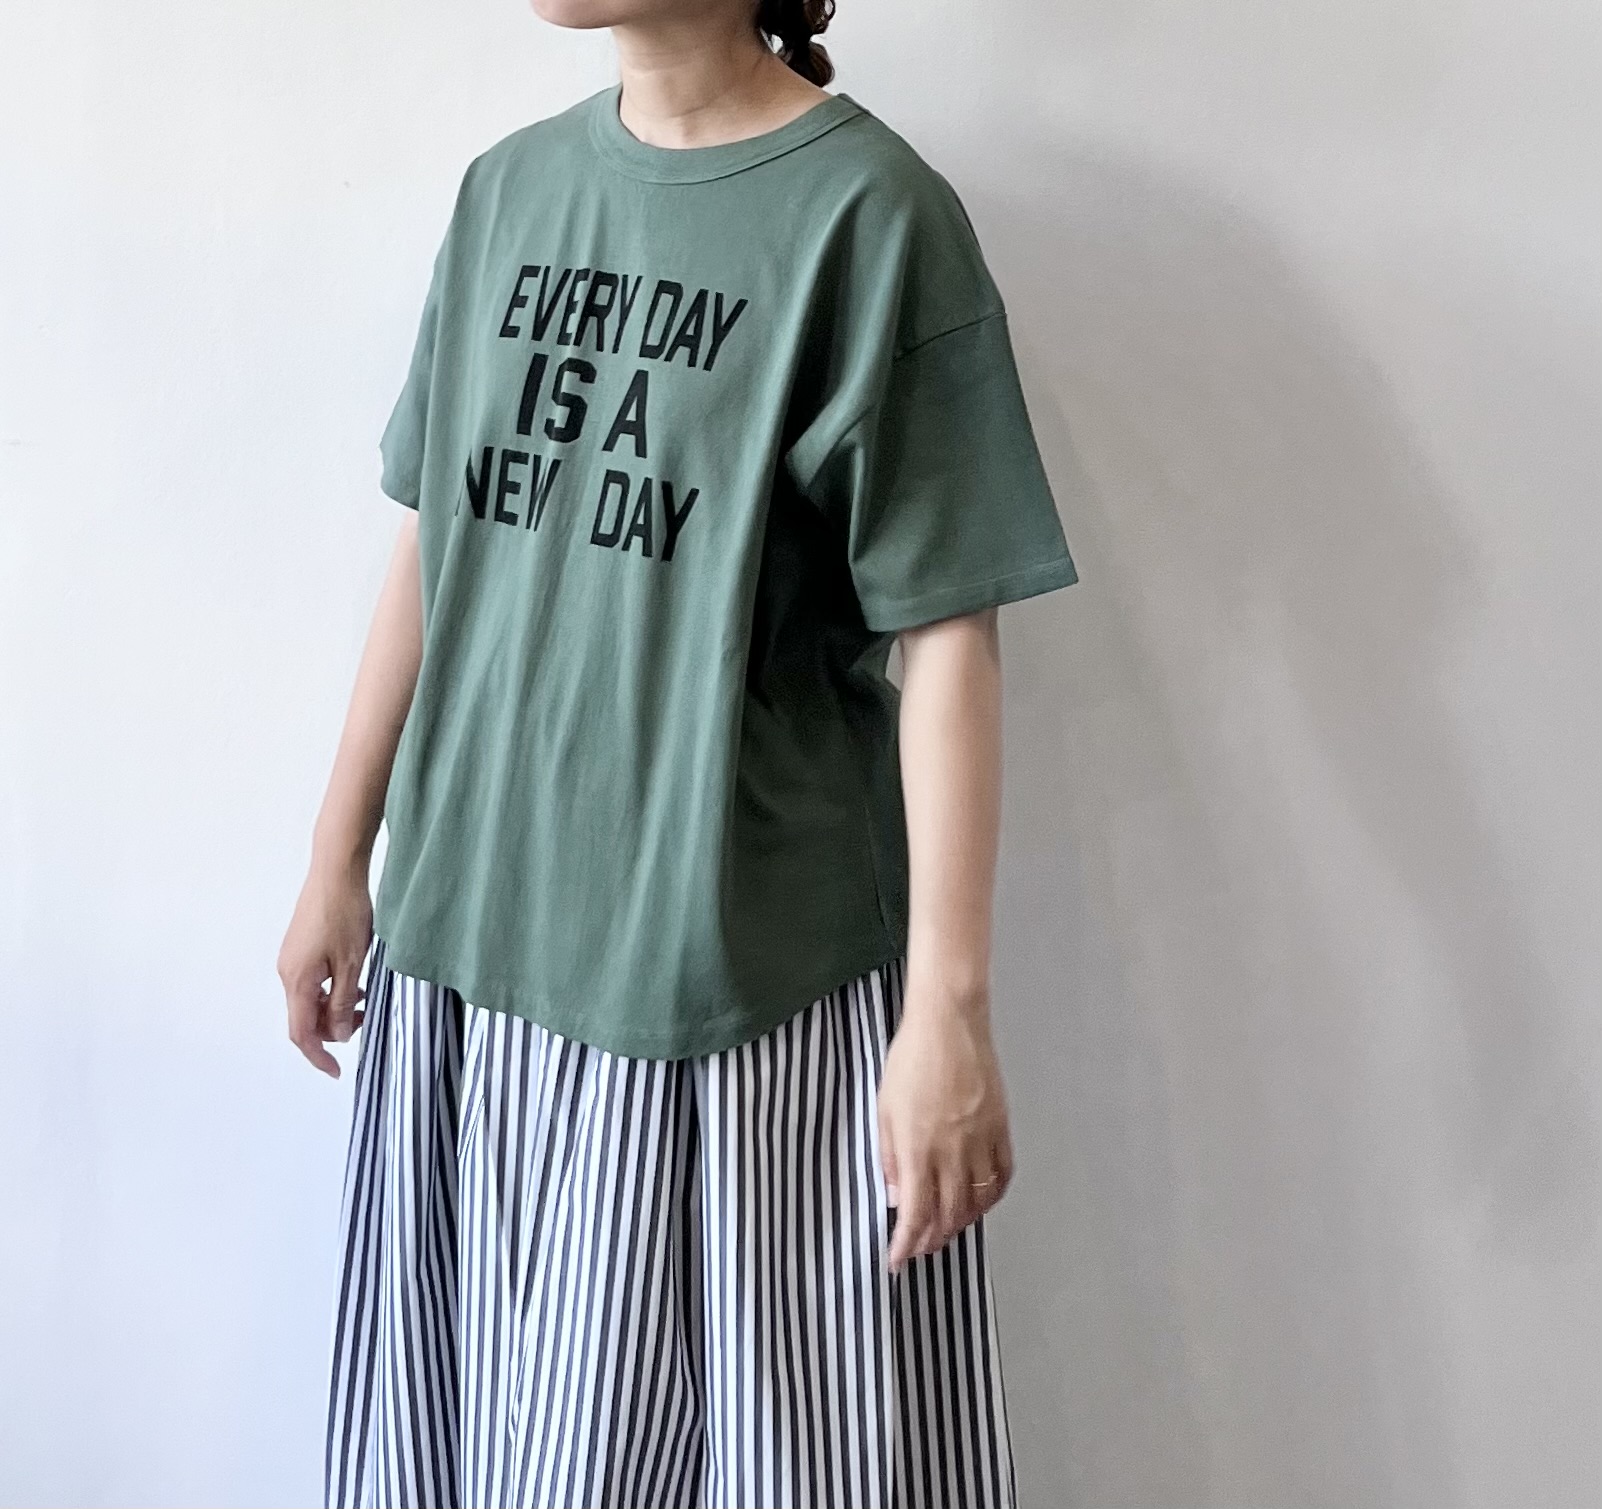 BLUE LAKE MARKET　ロゴプリントTEE”EVERY DAY IS A NEW DAY” 20%off